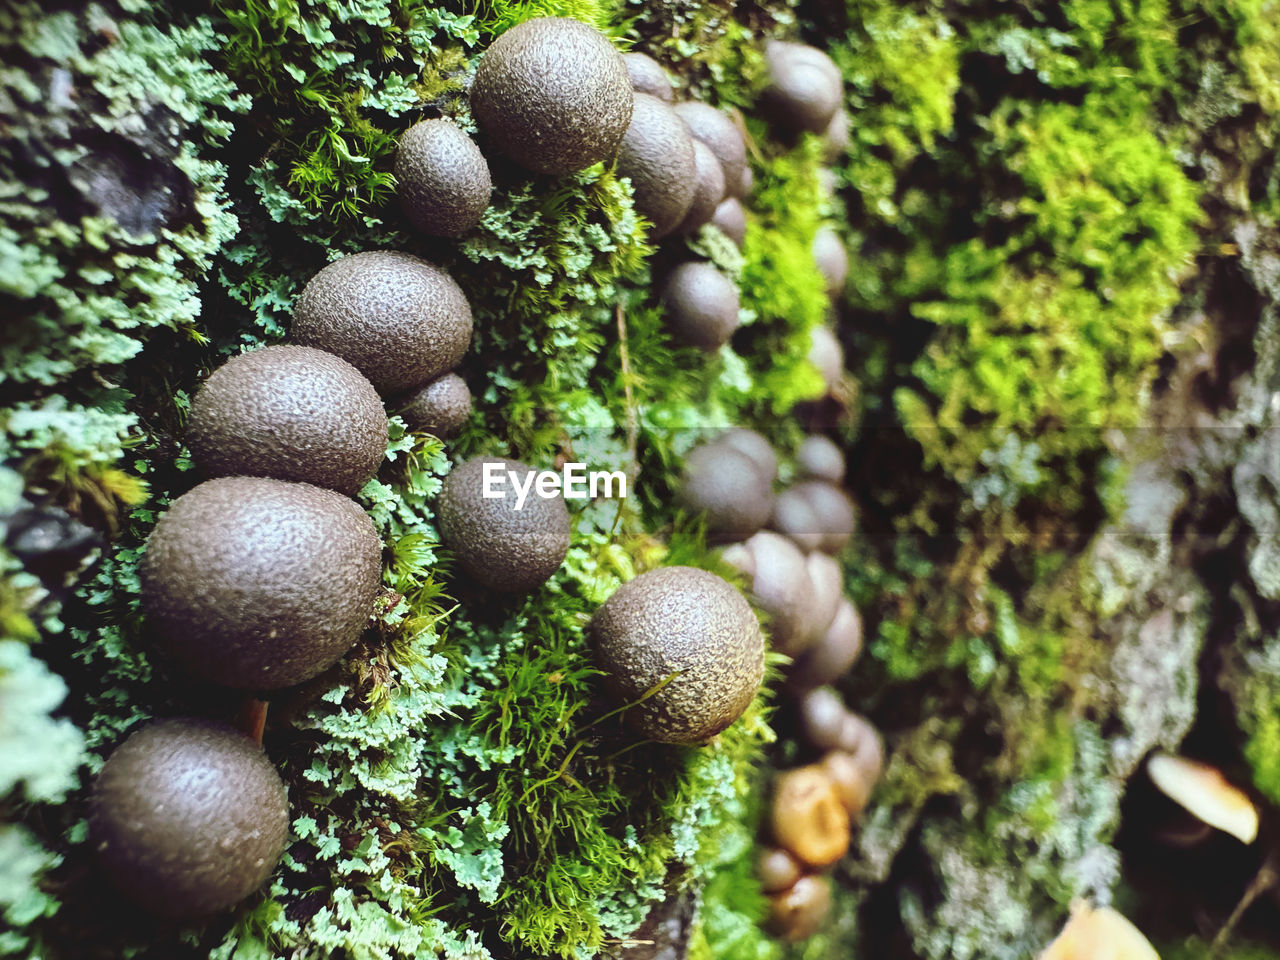 plant, growth, food, tree, nature, no people, fungus, close-up, woodland, food and drink, mushroom, forest, vegetable, day, edible mushroom, beauty in nature, moss, green, land, natural environment, outdoors, freshness, selective focus, healthy eating, high angle view